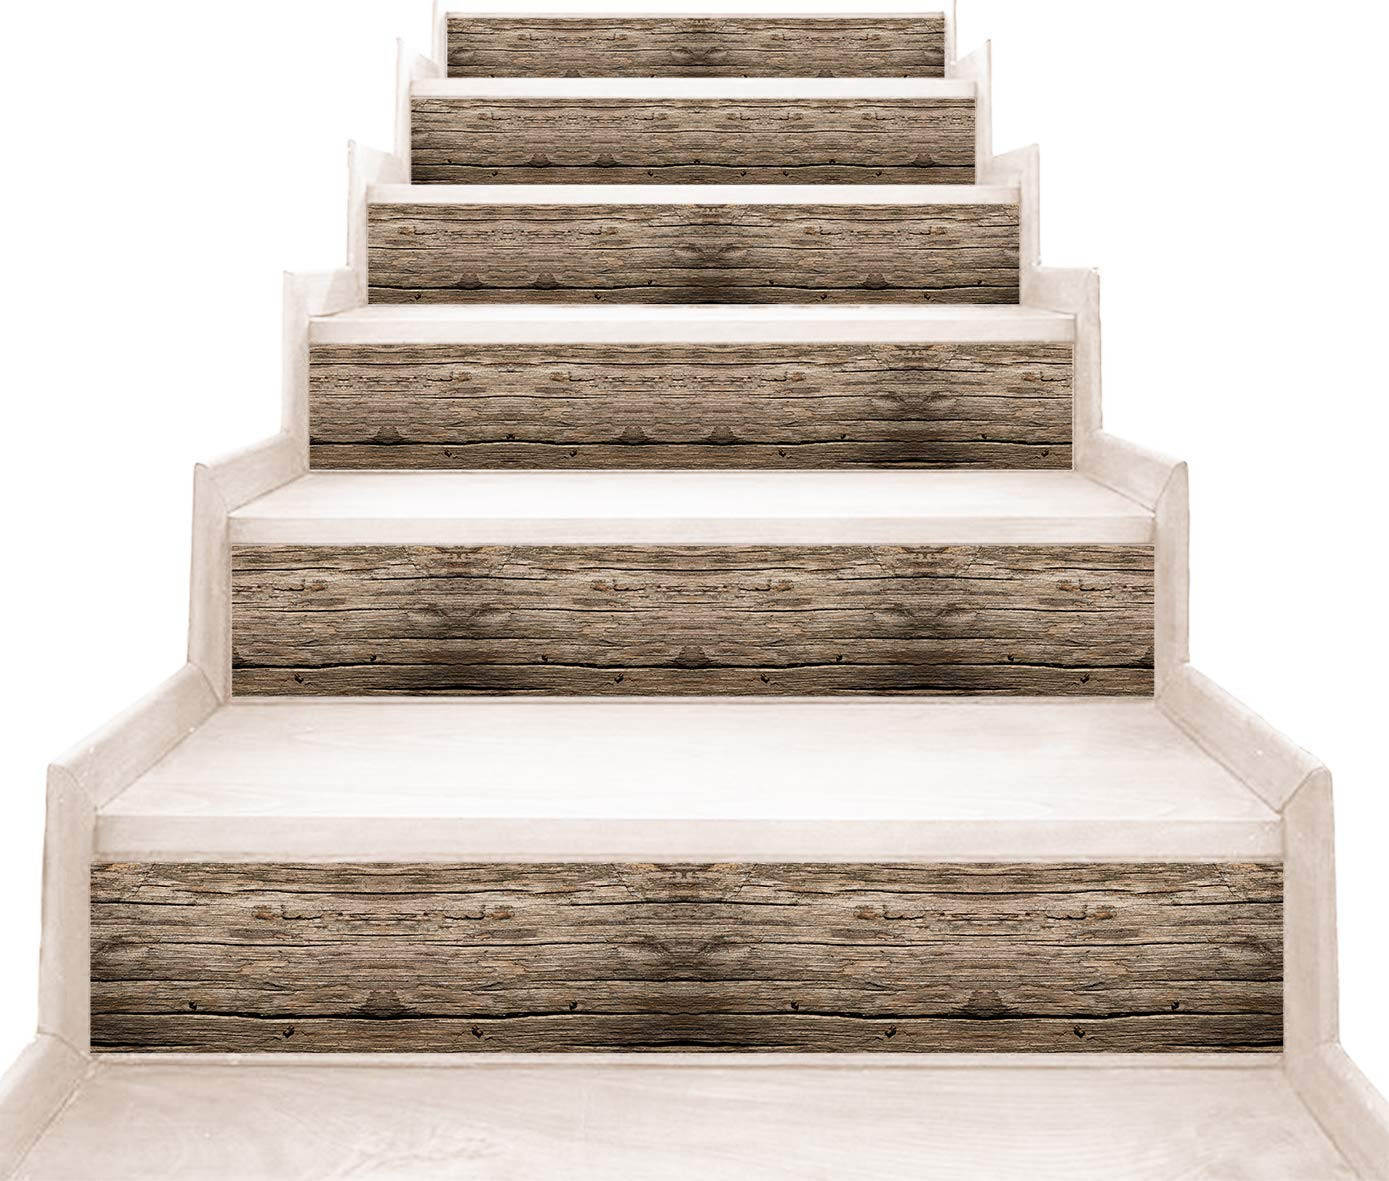 10 Spectacular Should Hardwood Floors Match Stairs 2024 free download should hardwood floors match stairs of amazon com infinitedots vinyl decal strips for stair risers wall pertaining to amazon com infinitedots vinyl decal strips for stair risers wall borders